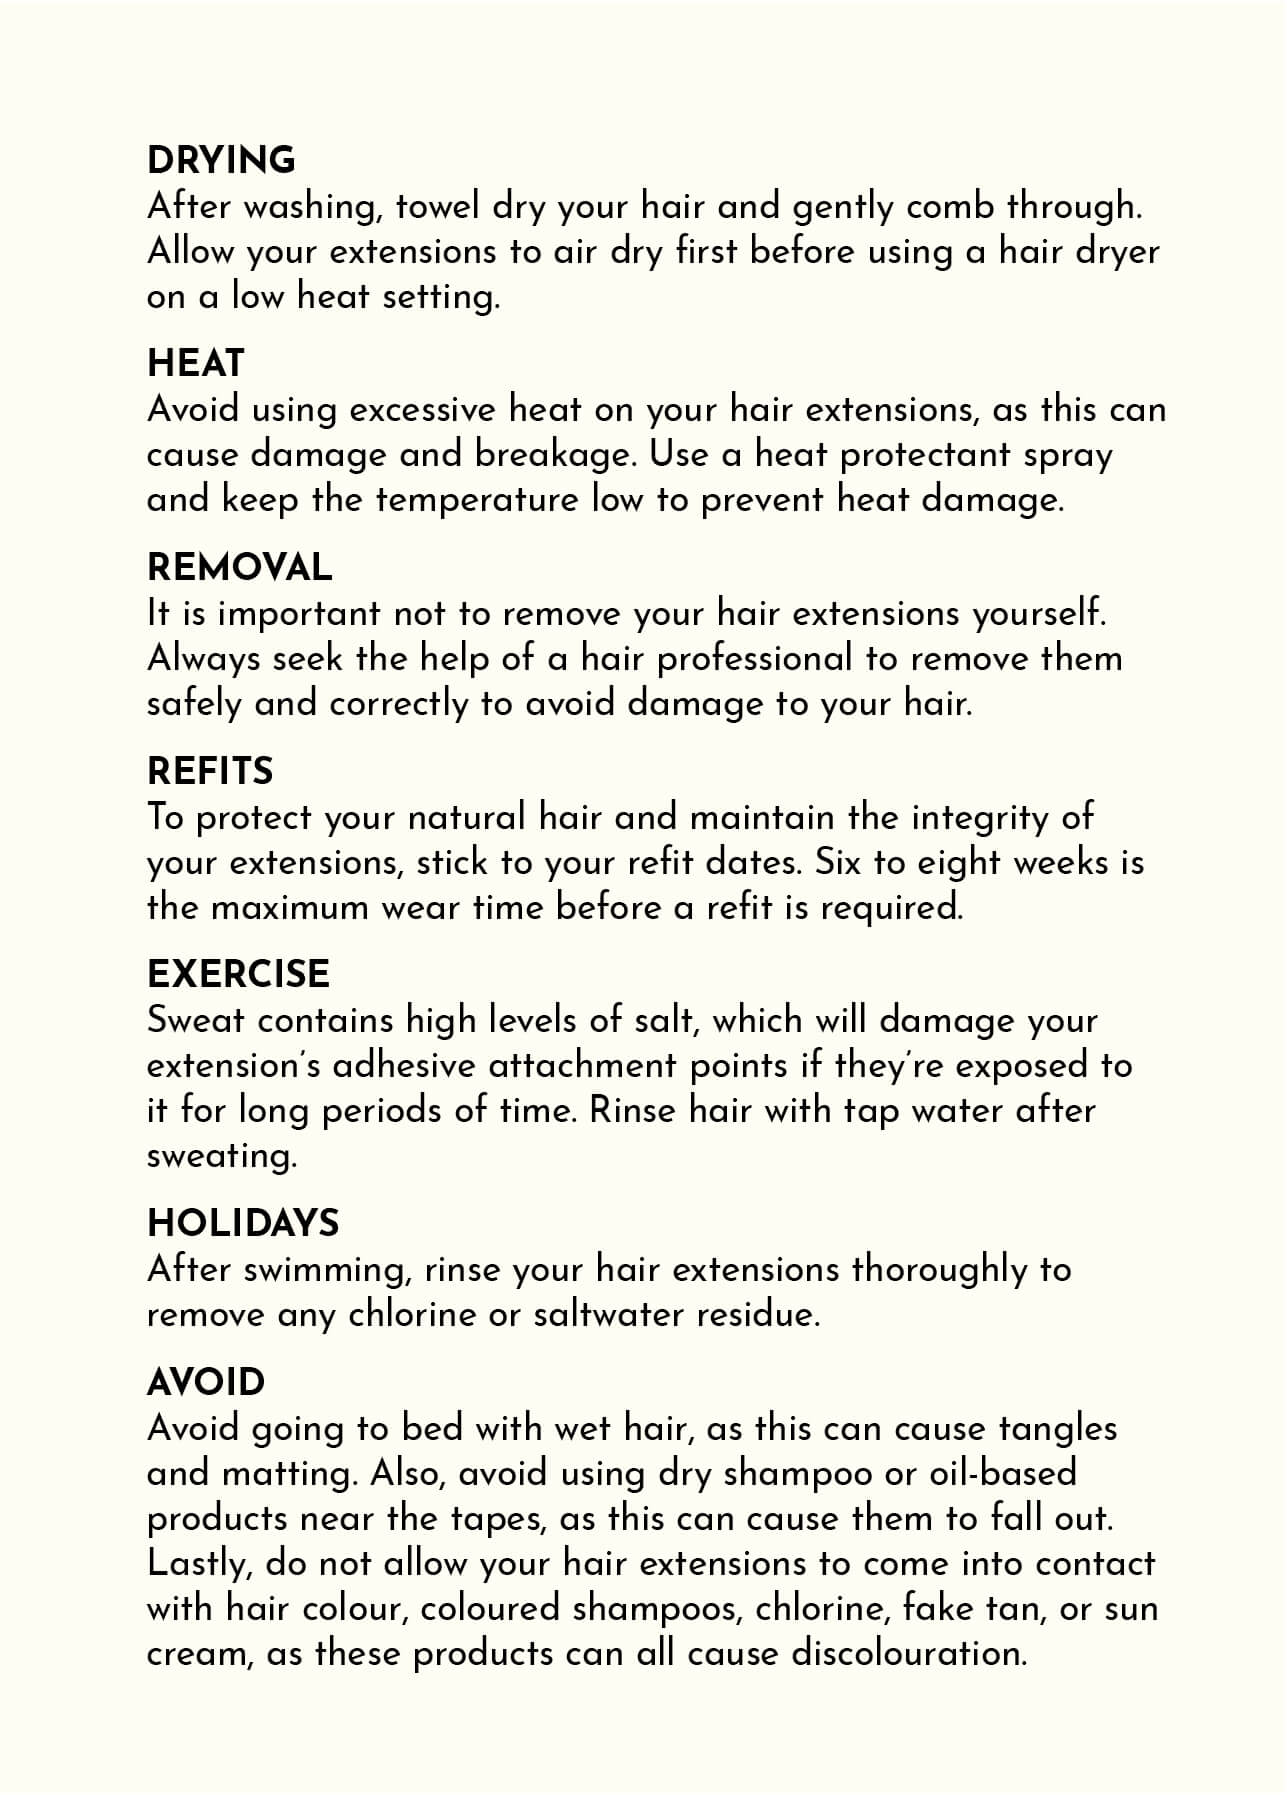 Hair Extension Aftercare Guide Page 4